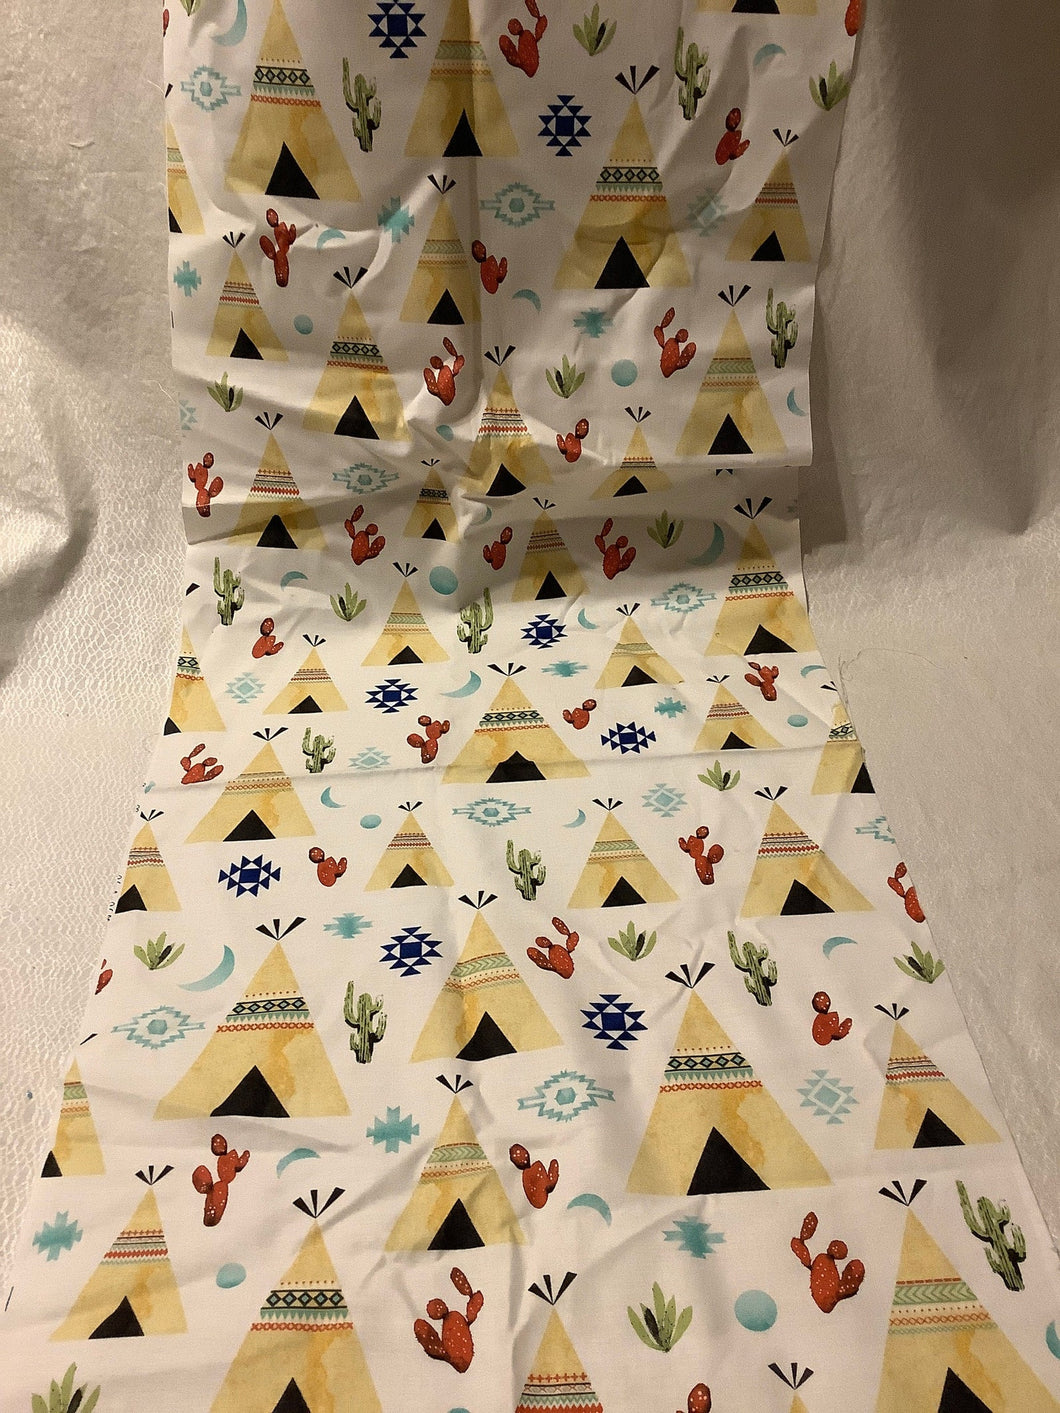 Desert Dawn teepees and cactus by Hailey Hoffman 14 inches wide by 86 inches long